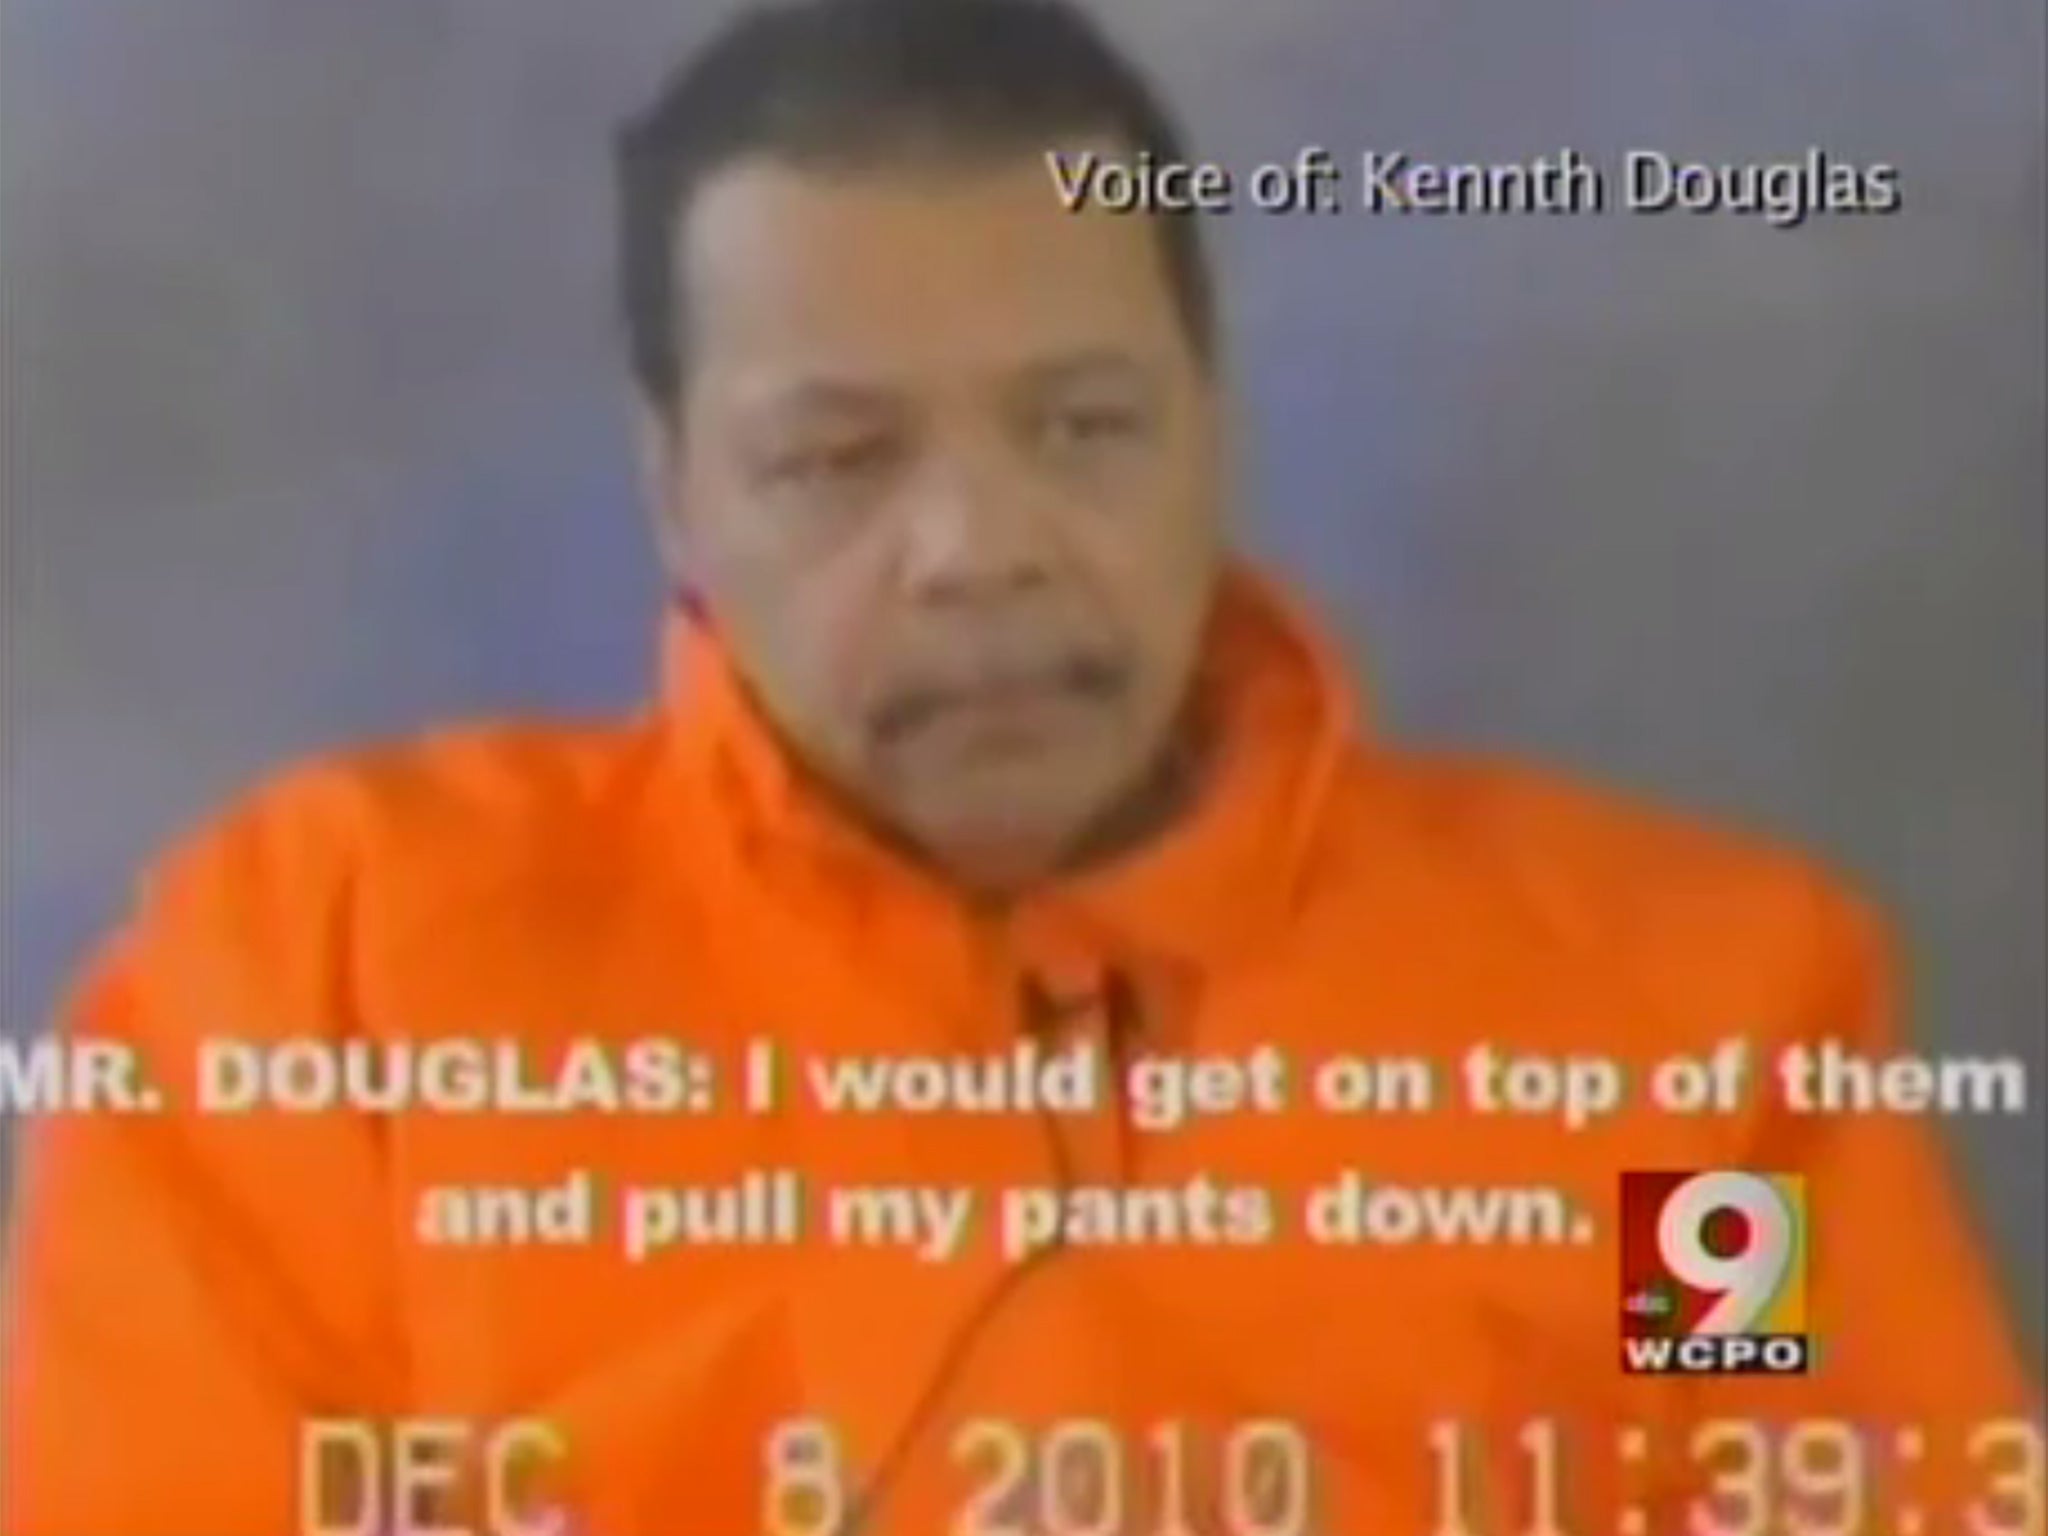 Kenneth Douglas's testimony is revealed in the video